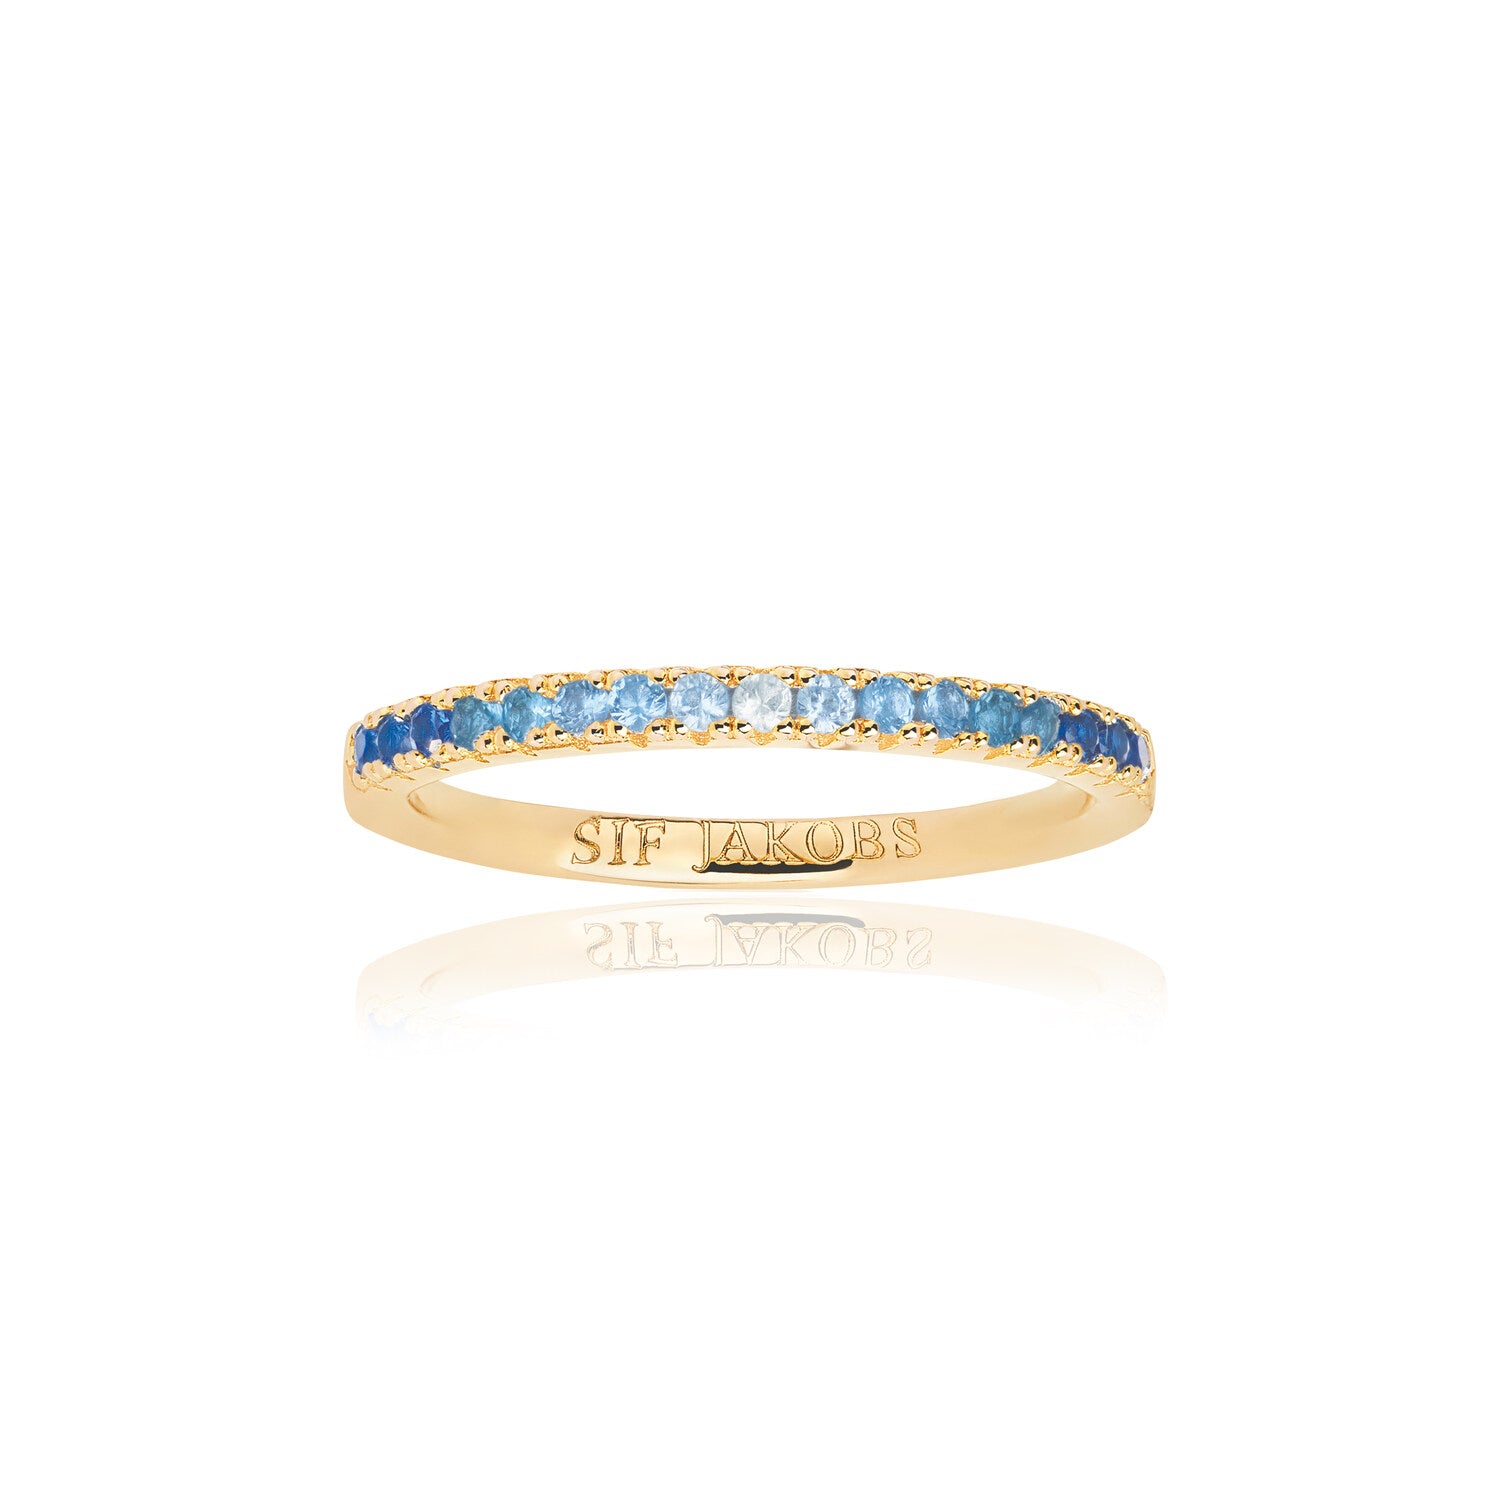 18K gold plated | Blue gradient | 60, 18K gold plated | Blue gradient | 58, 18K gold plated | Blue gradient | 56, 18K gold plated | Blue gradient | 54, 18K gold plated | Blue gradient | 52, 18K gold plated | Blue gradient | 50